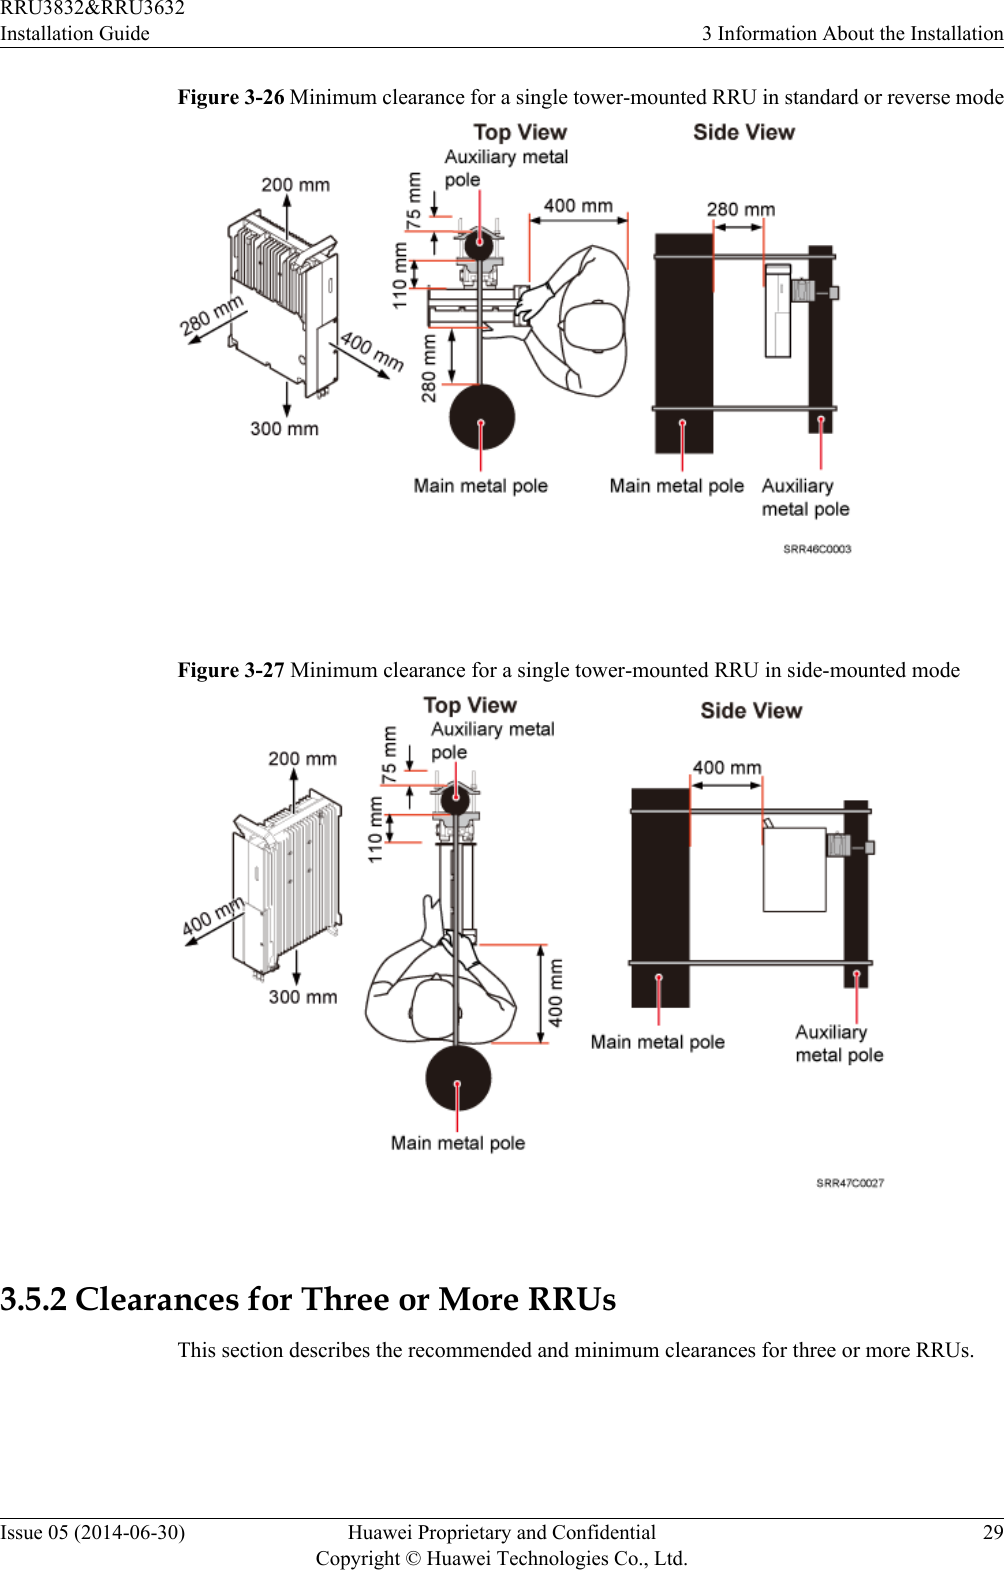 Figure 3-26 Minimum clearance for a single tower-mounted RRU in standard or reverse mode Figure 3-27 Minimum clearance for a single tower-mounted RRU in side-mounted mode 3.5.2 Clearances for Three or More RRUsThis section describes the recommended and minimum clearances for three or more RRUs.RRU3832&amp;RRU3632Installation Guide 3 Information About the InstallationIssue 05 (2014-06-30) Huawei Proprietary and ConfidentialCopyright © Huawei Technologies Co., Ltd.29